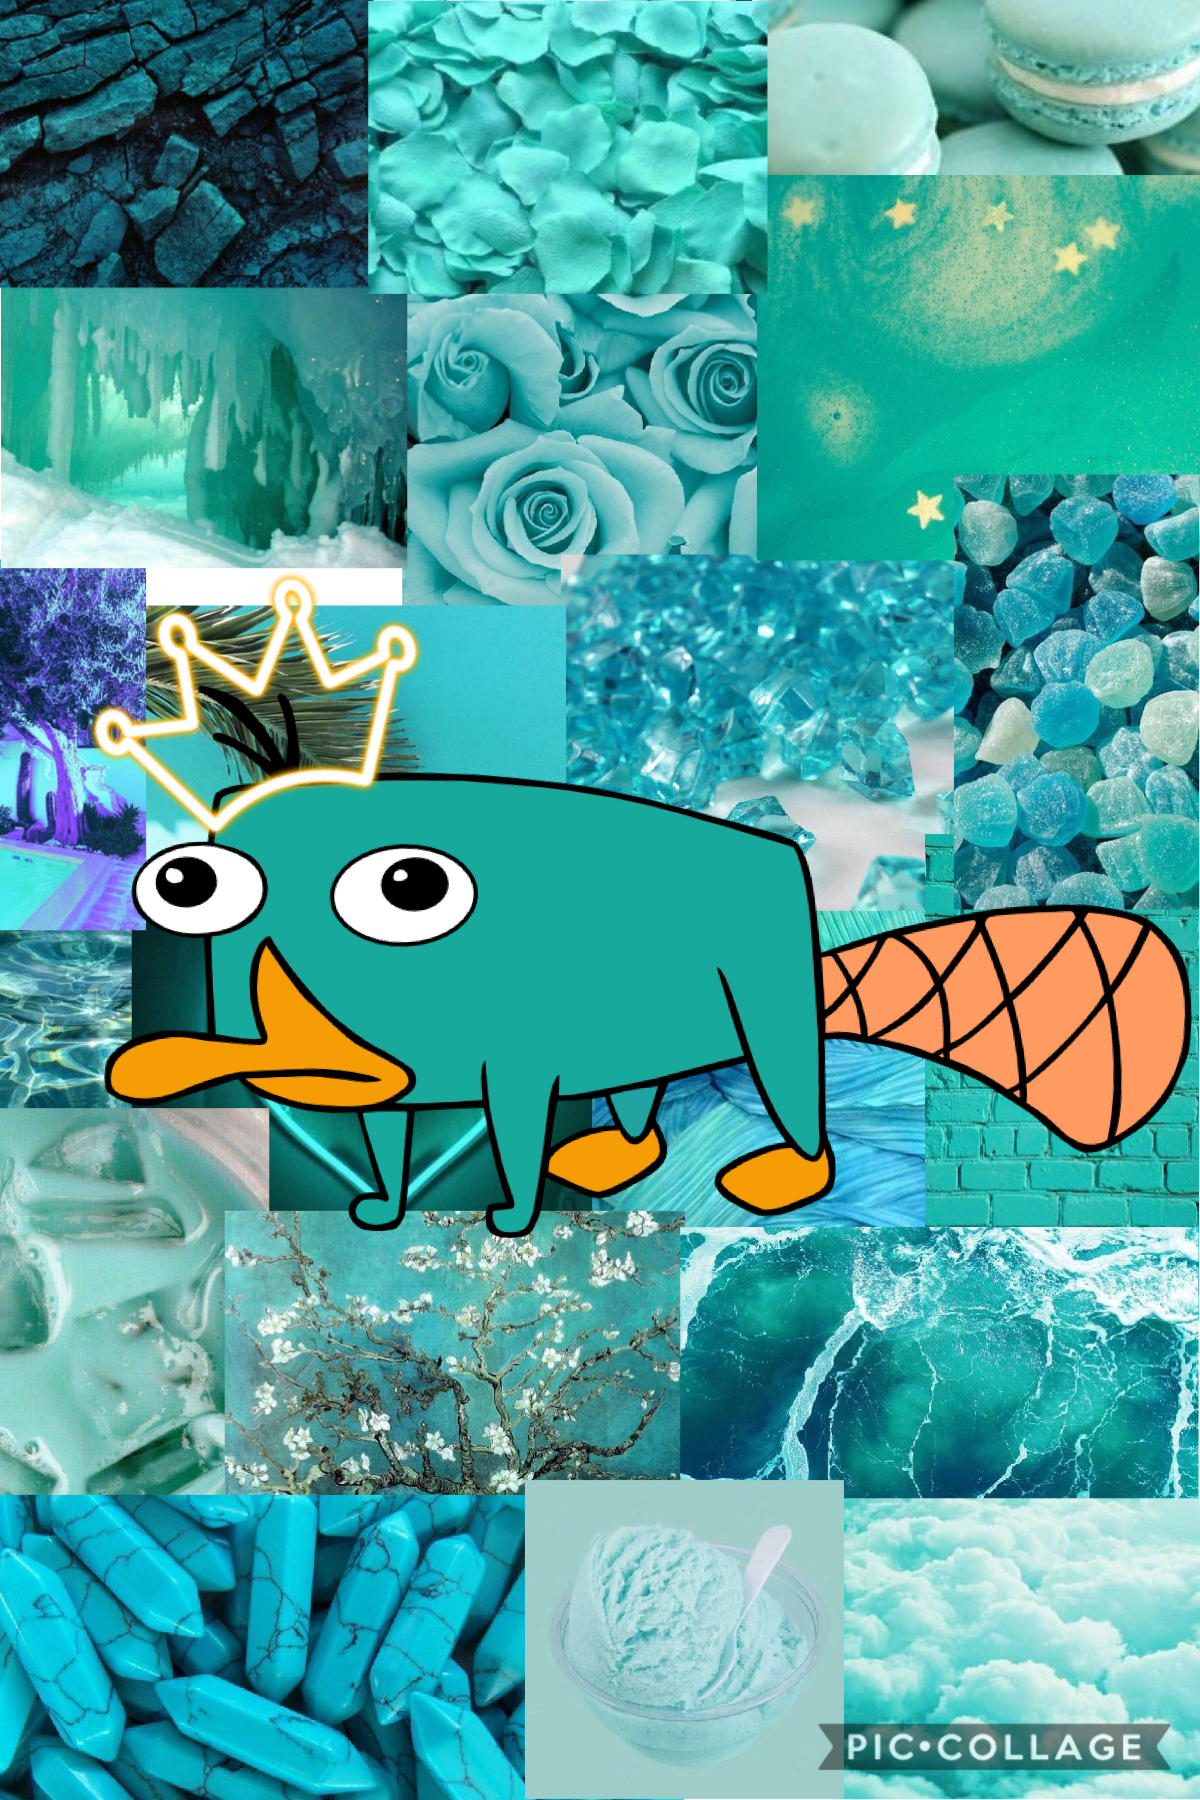 here is the perry the platypus one! these could all be wallpapers for you and your friends!